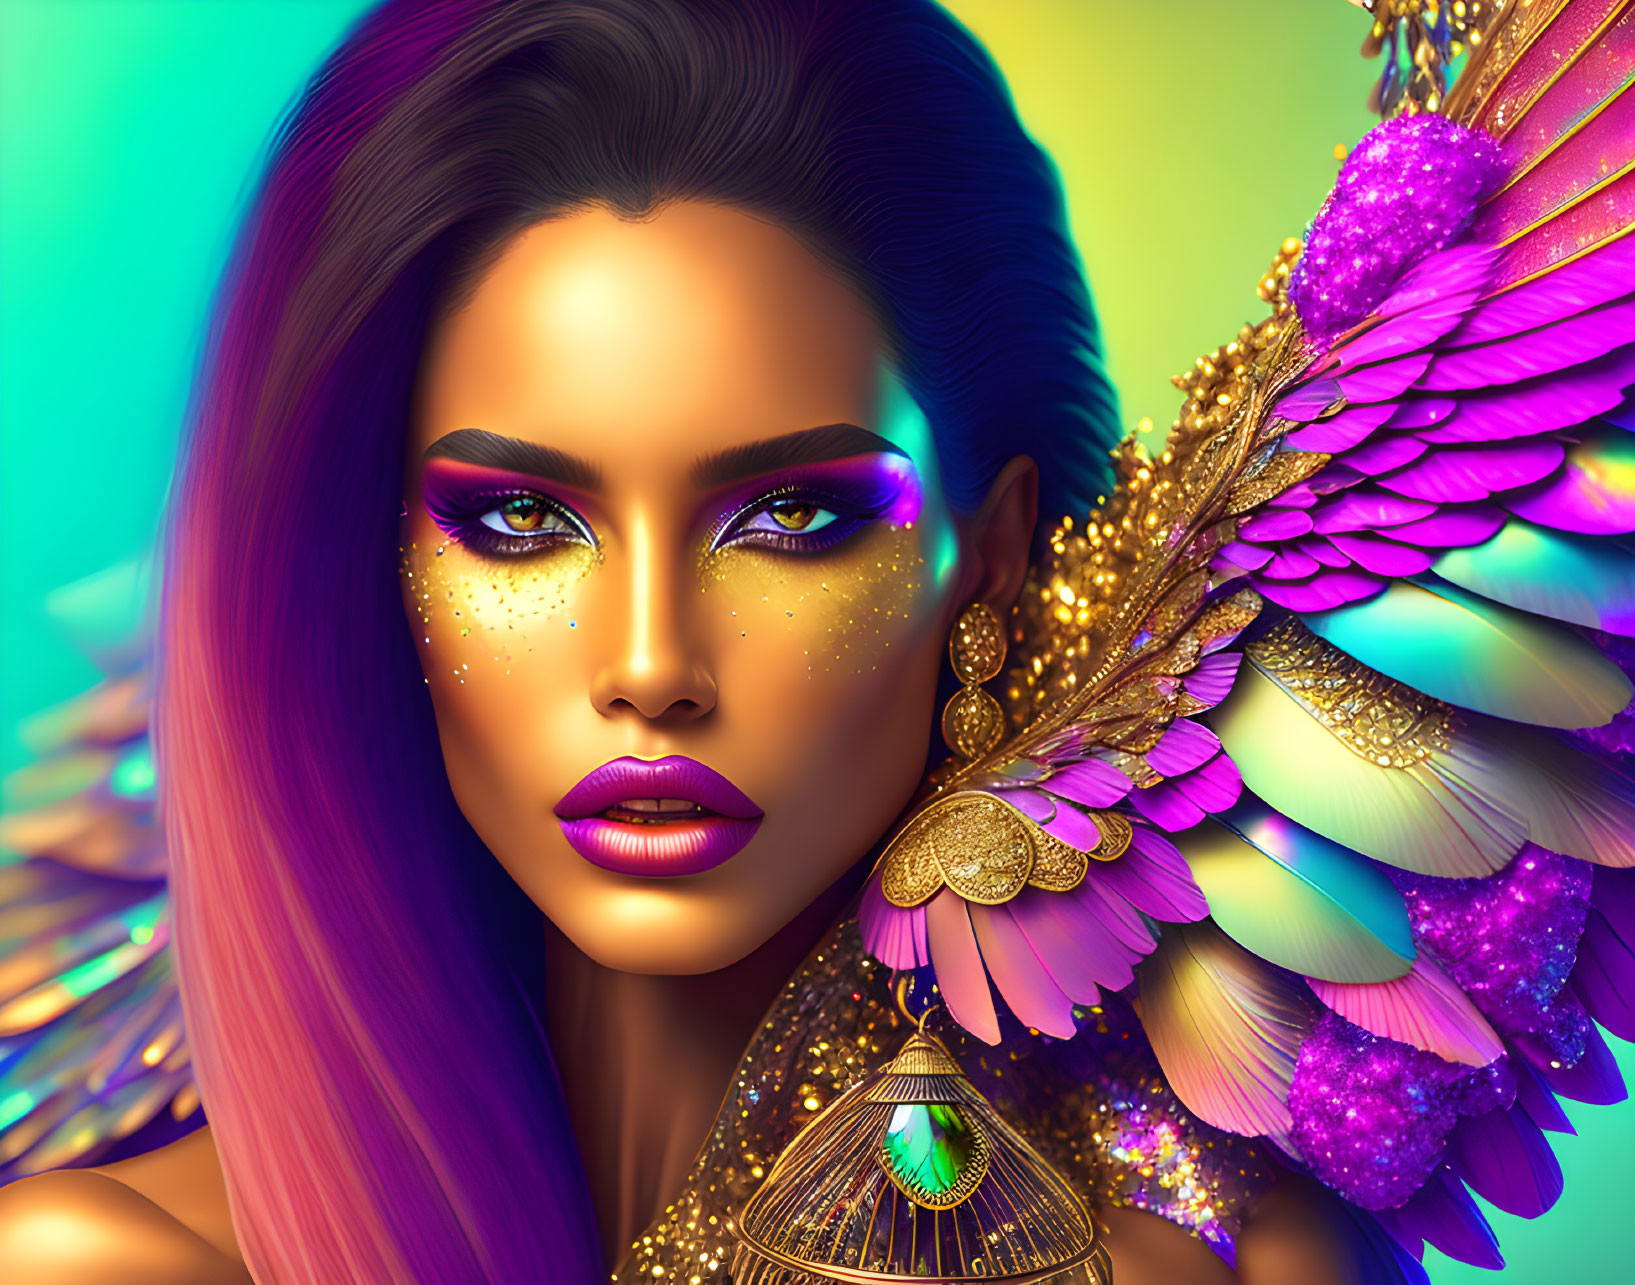 Colorful digital illustration of woman with purple makeup and feathered wings